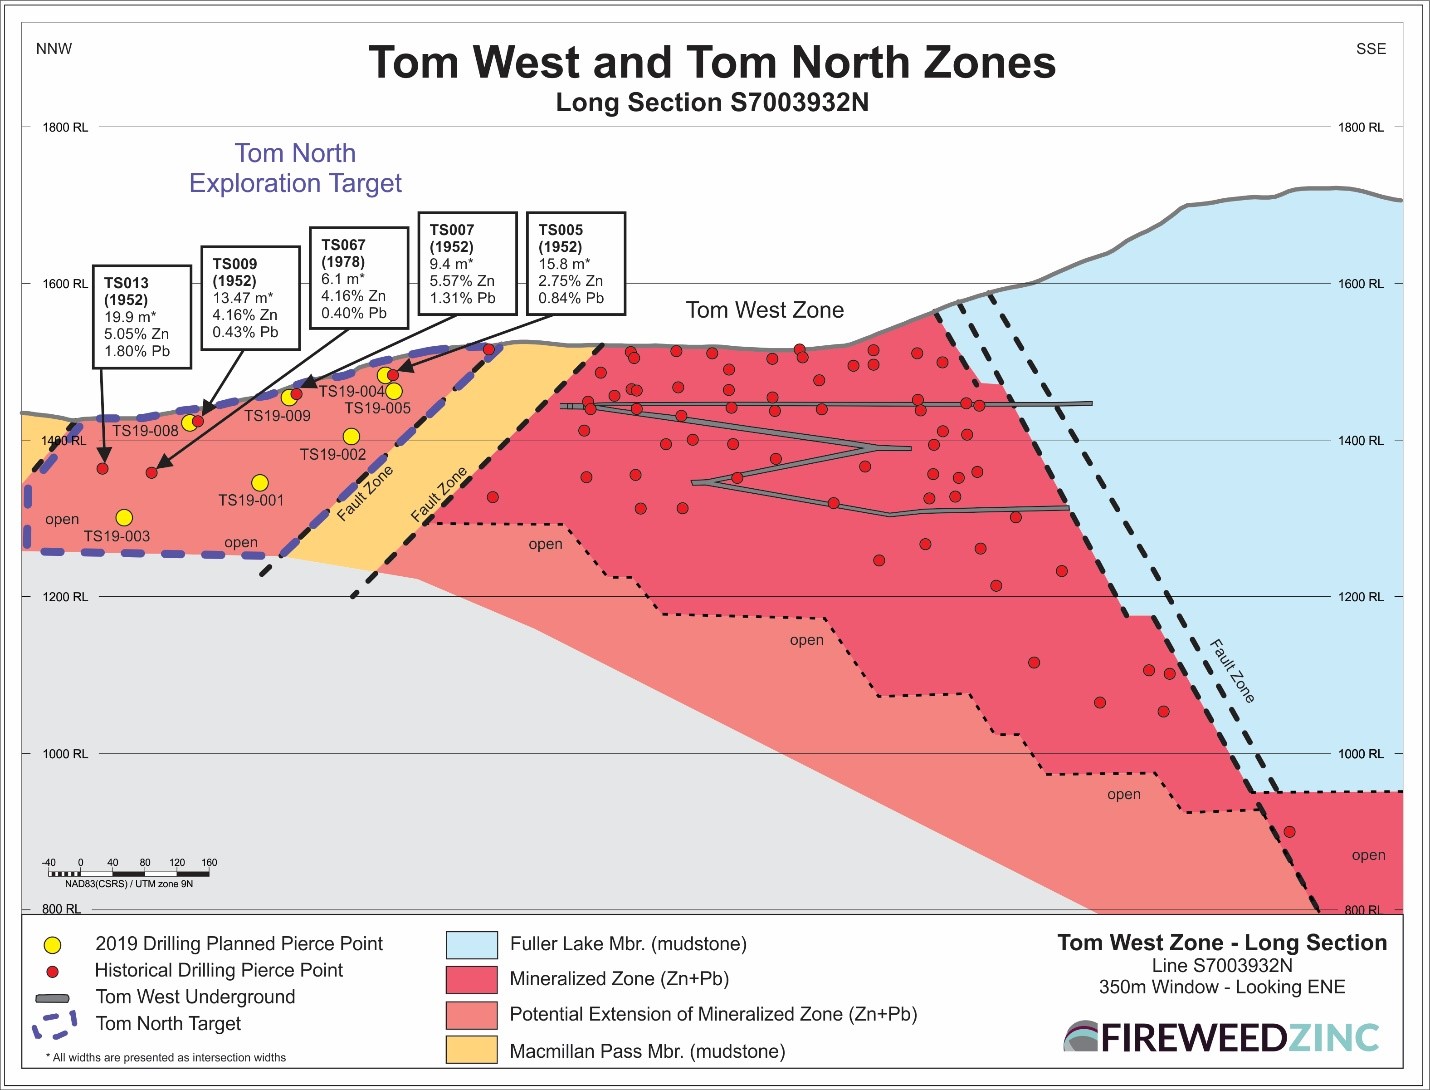 Tom West and Tom North Zones